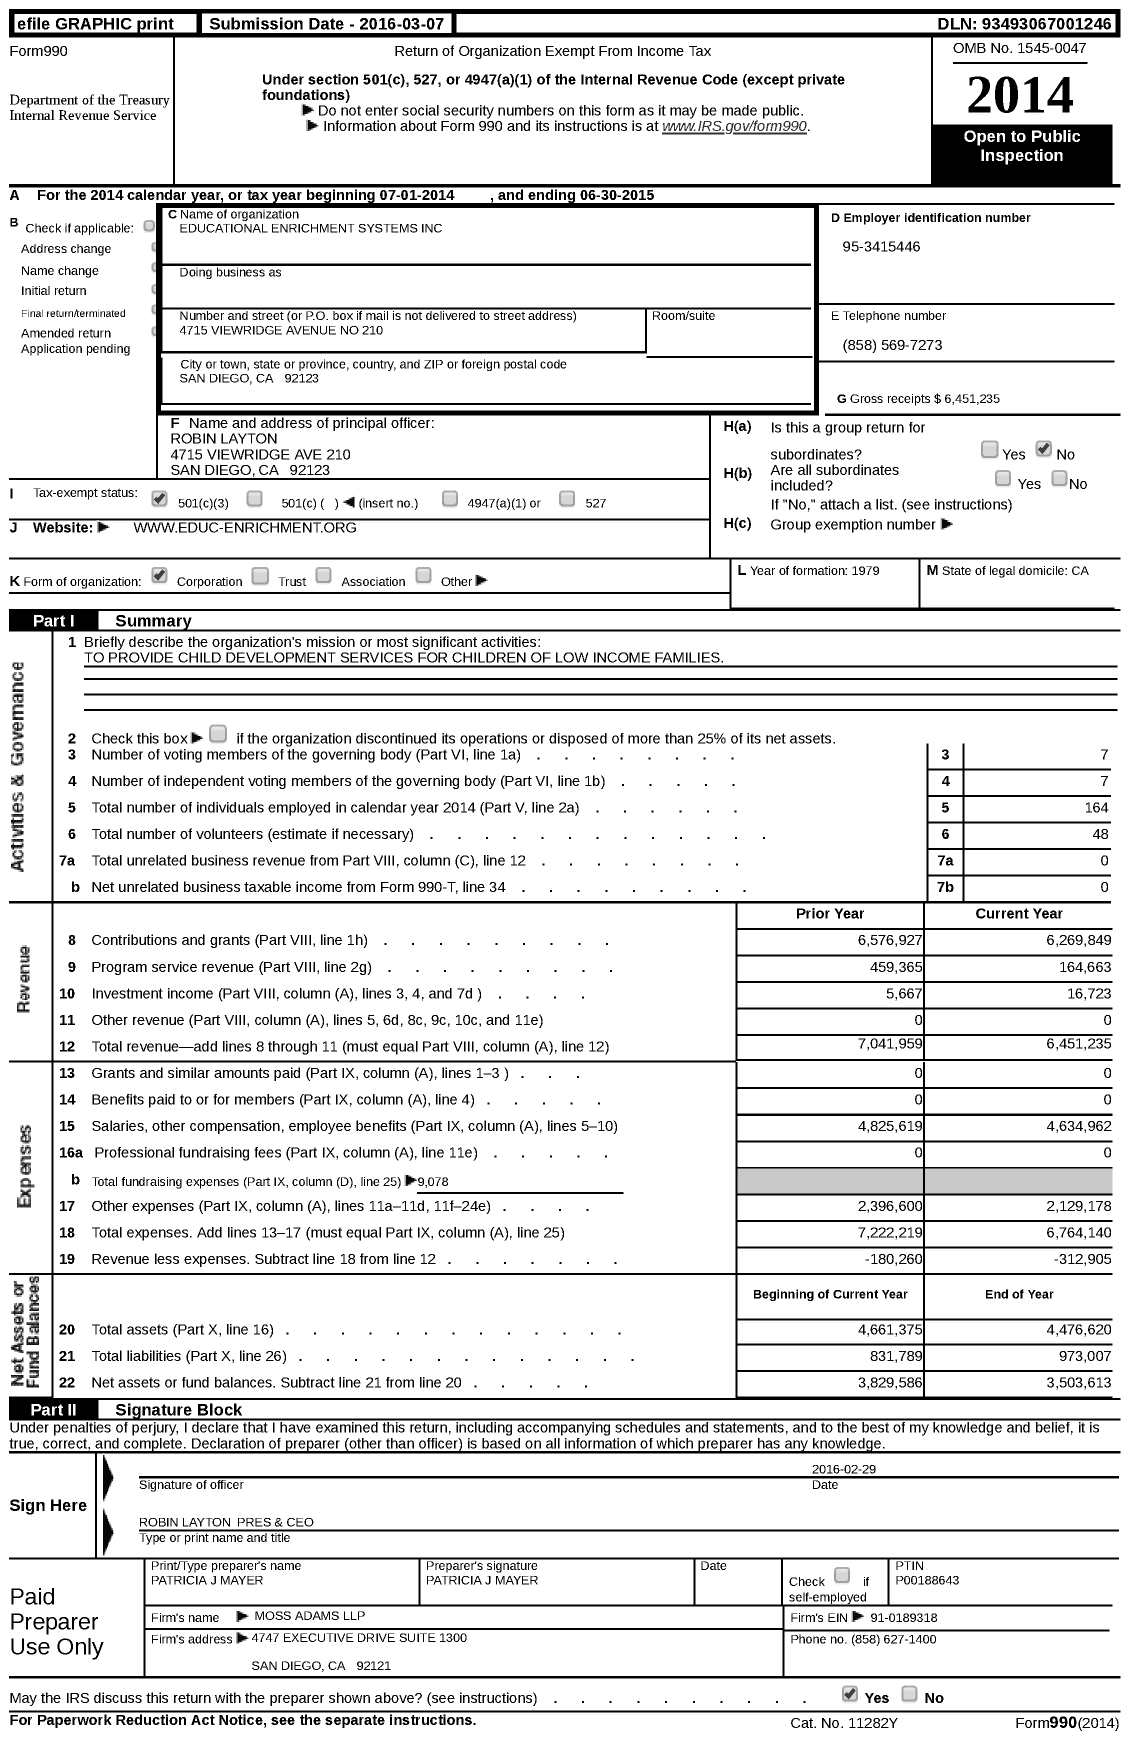 Image of first page of 2014 Form 990 for Educational Enrichment Systems